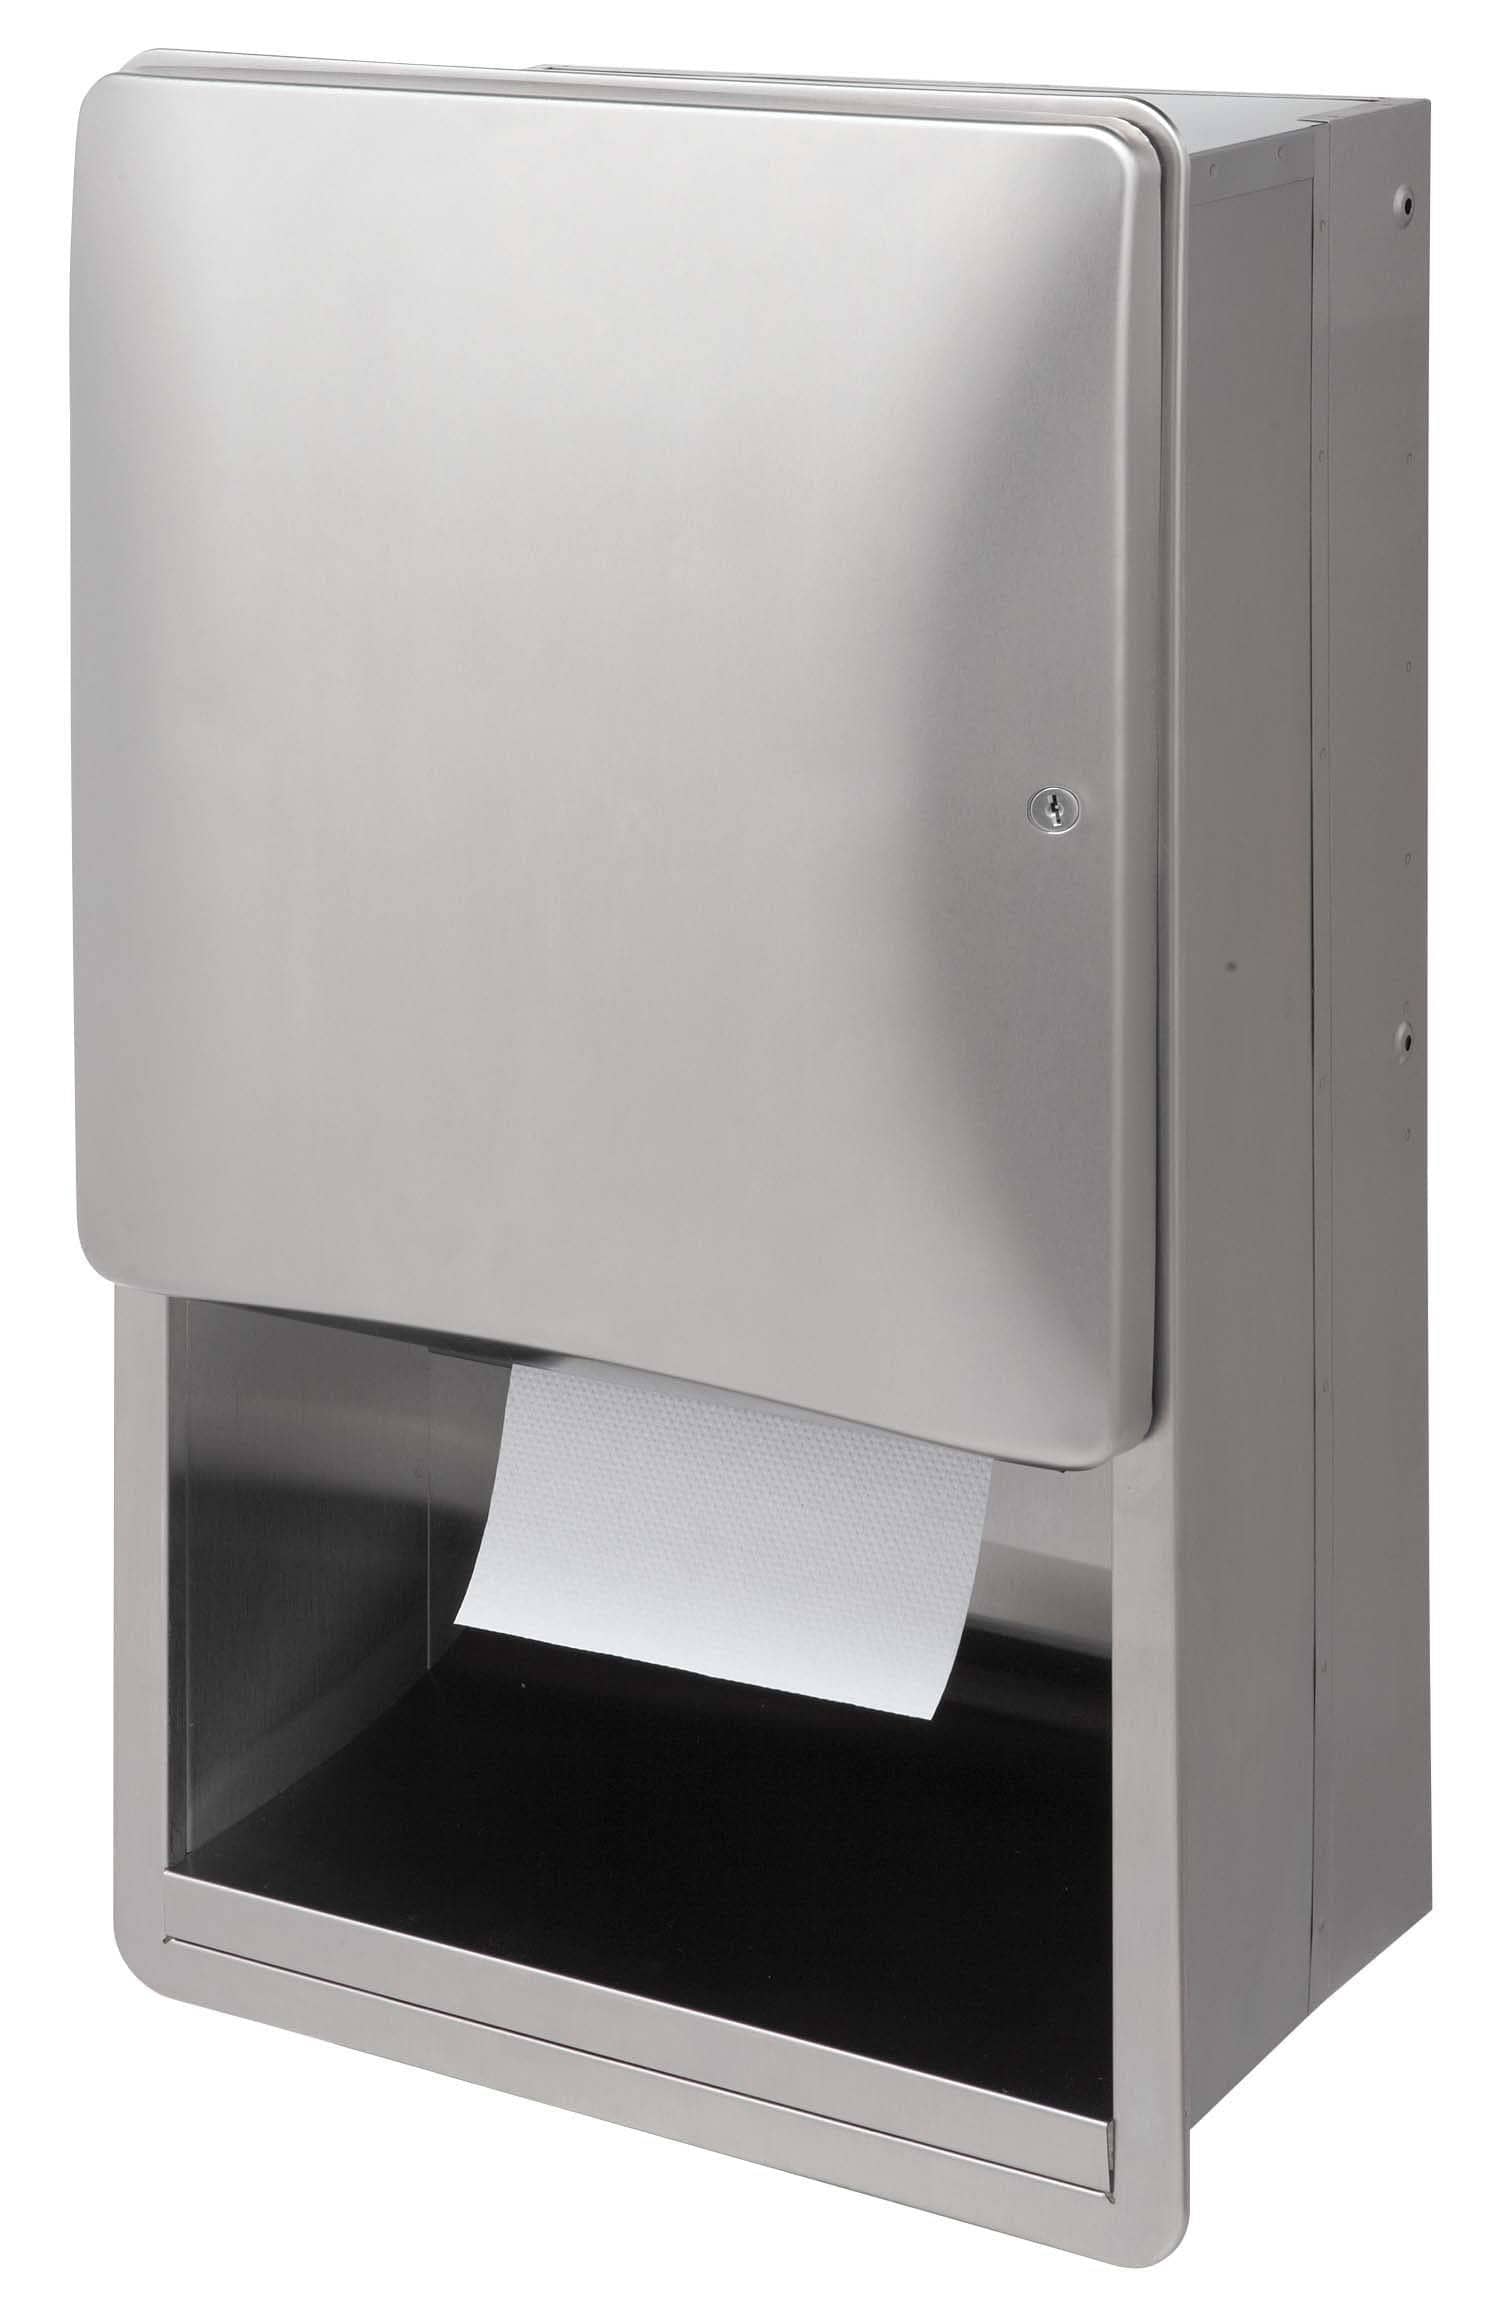 Bradley 2A01 Commercial Paper Towel Dispenser, Recessed-Mounted, Stainless Steel - TotalRestroom.com